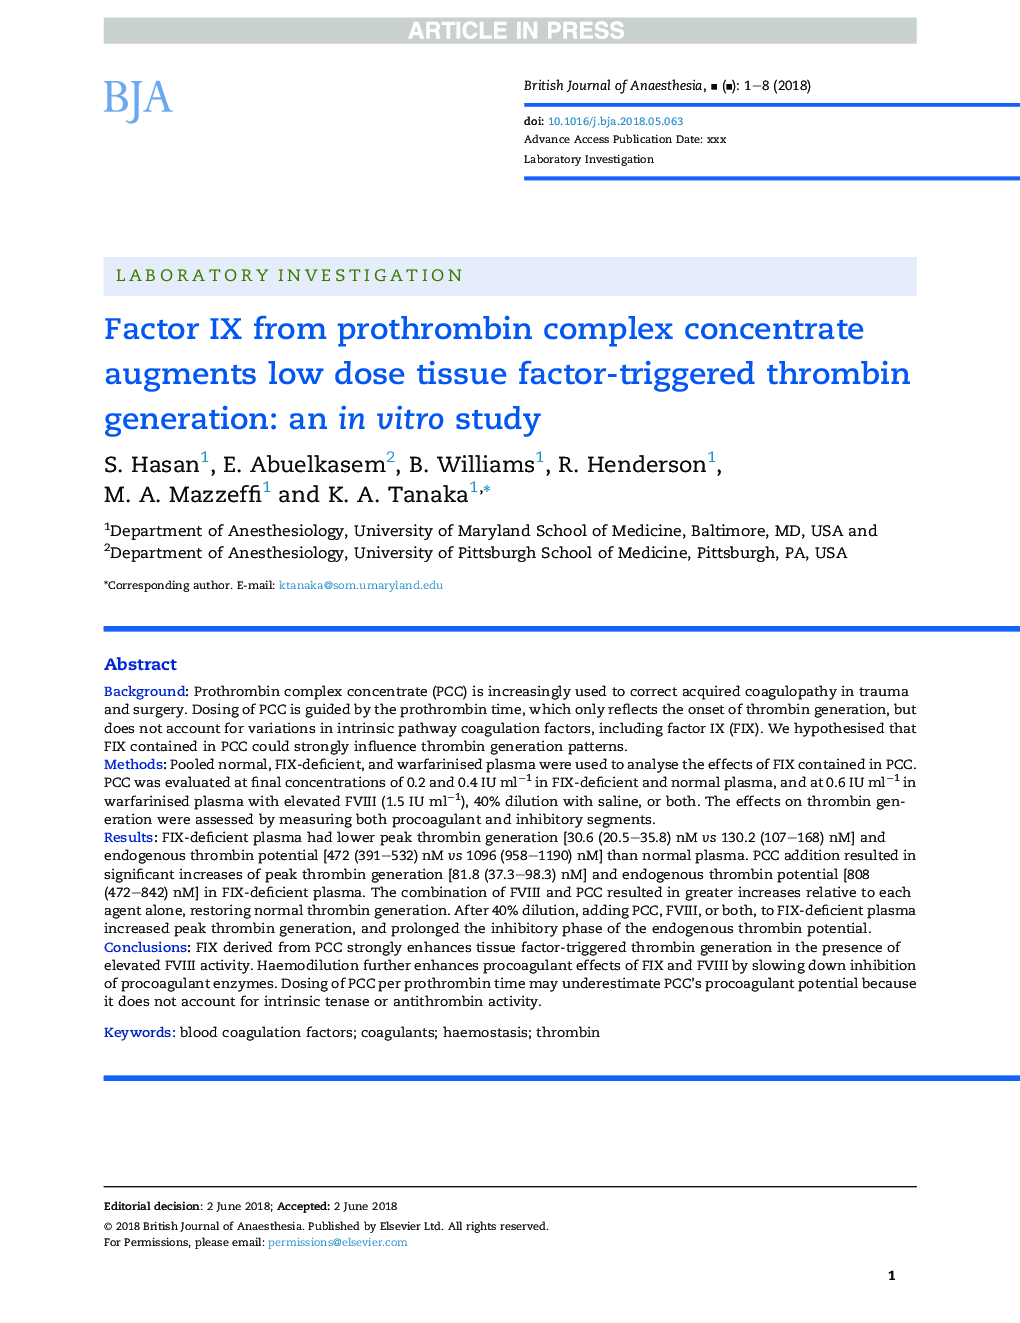 Factor IX from prothrombin complex concentrate augments low dose tissue factor-triggered thrombin generation inÂ vitro